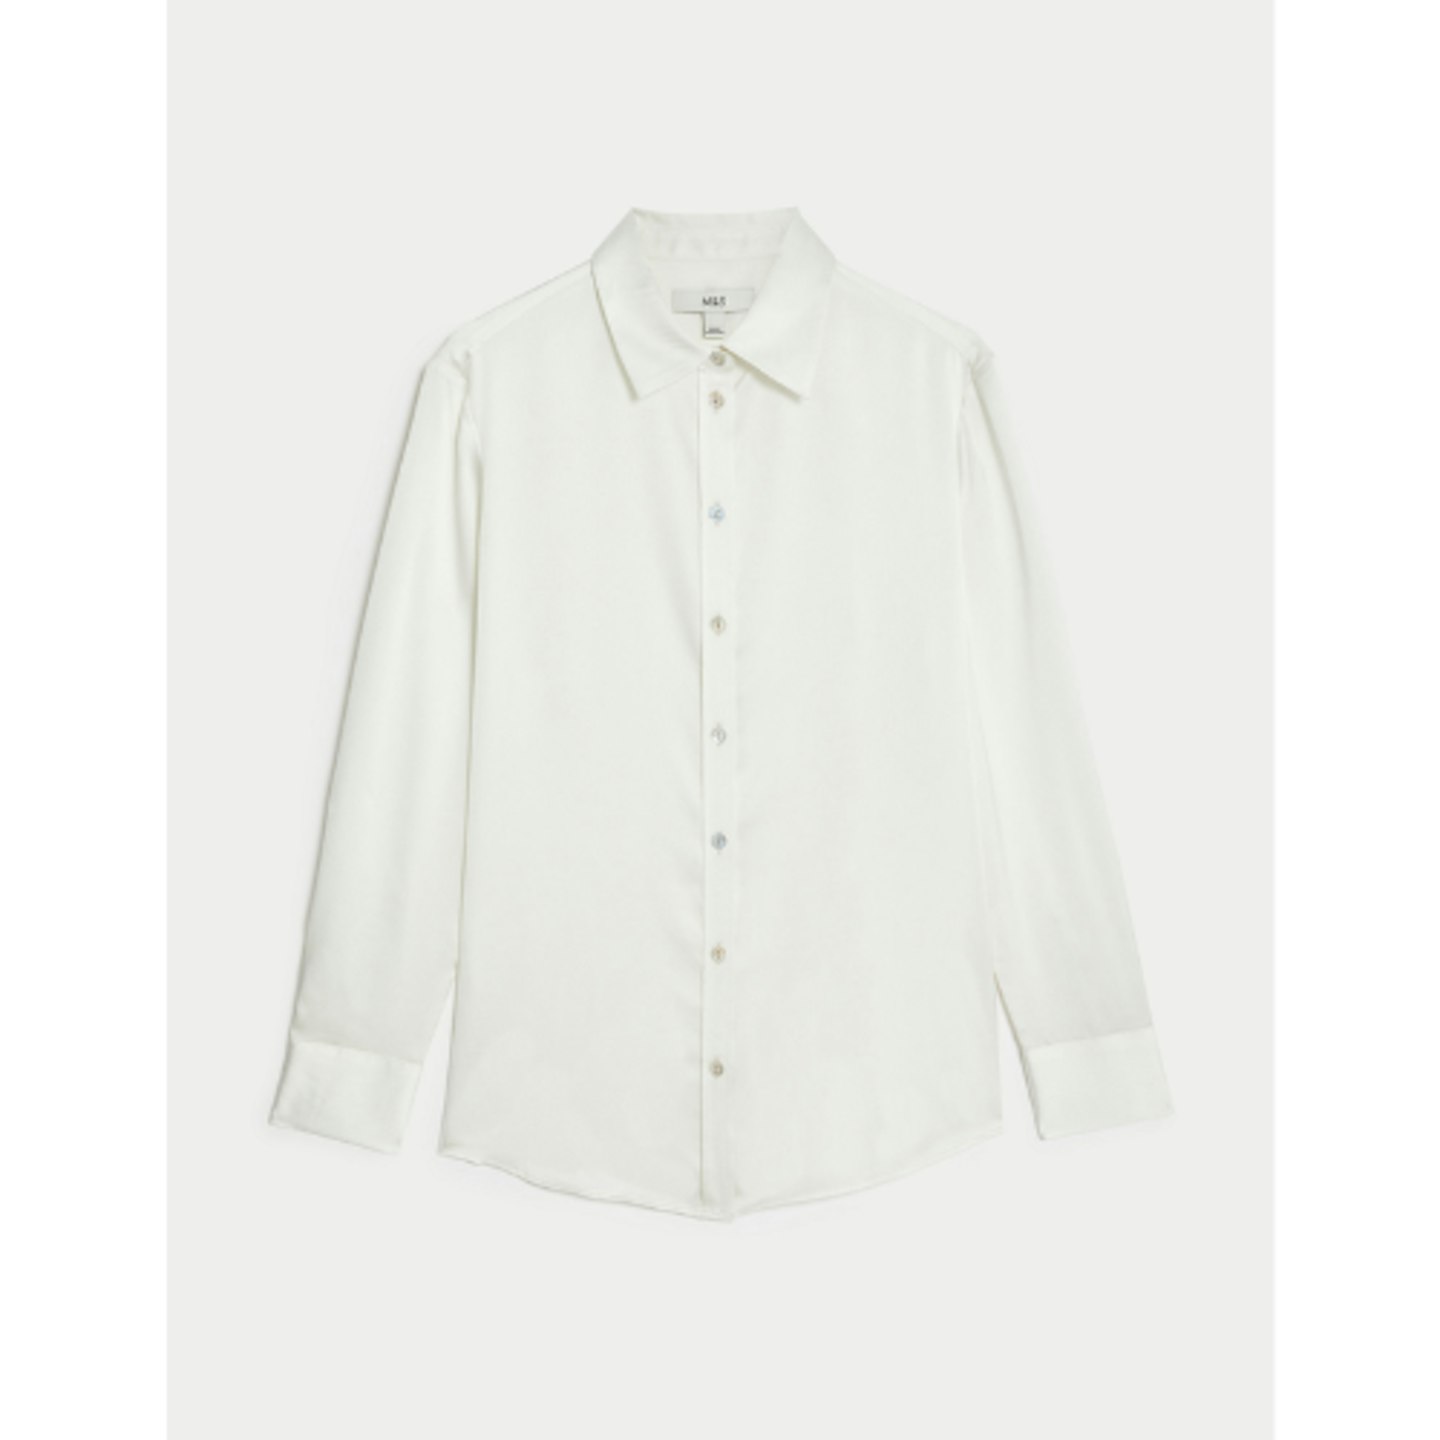 Claudia's White Blouse Dupe